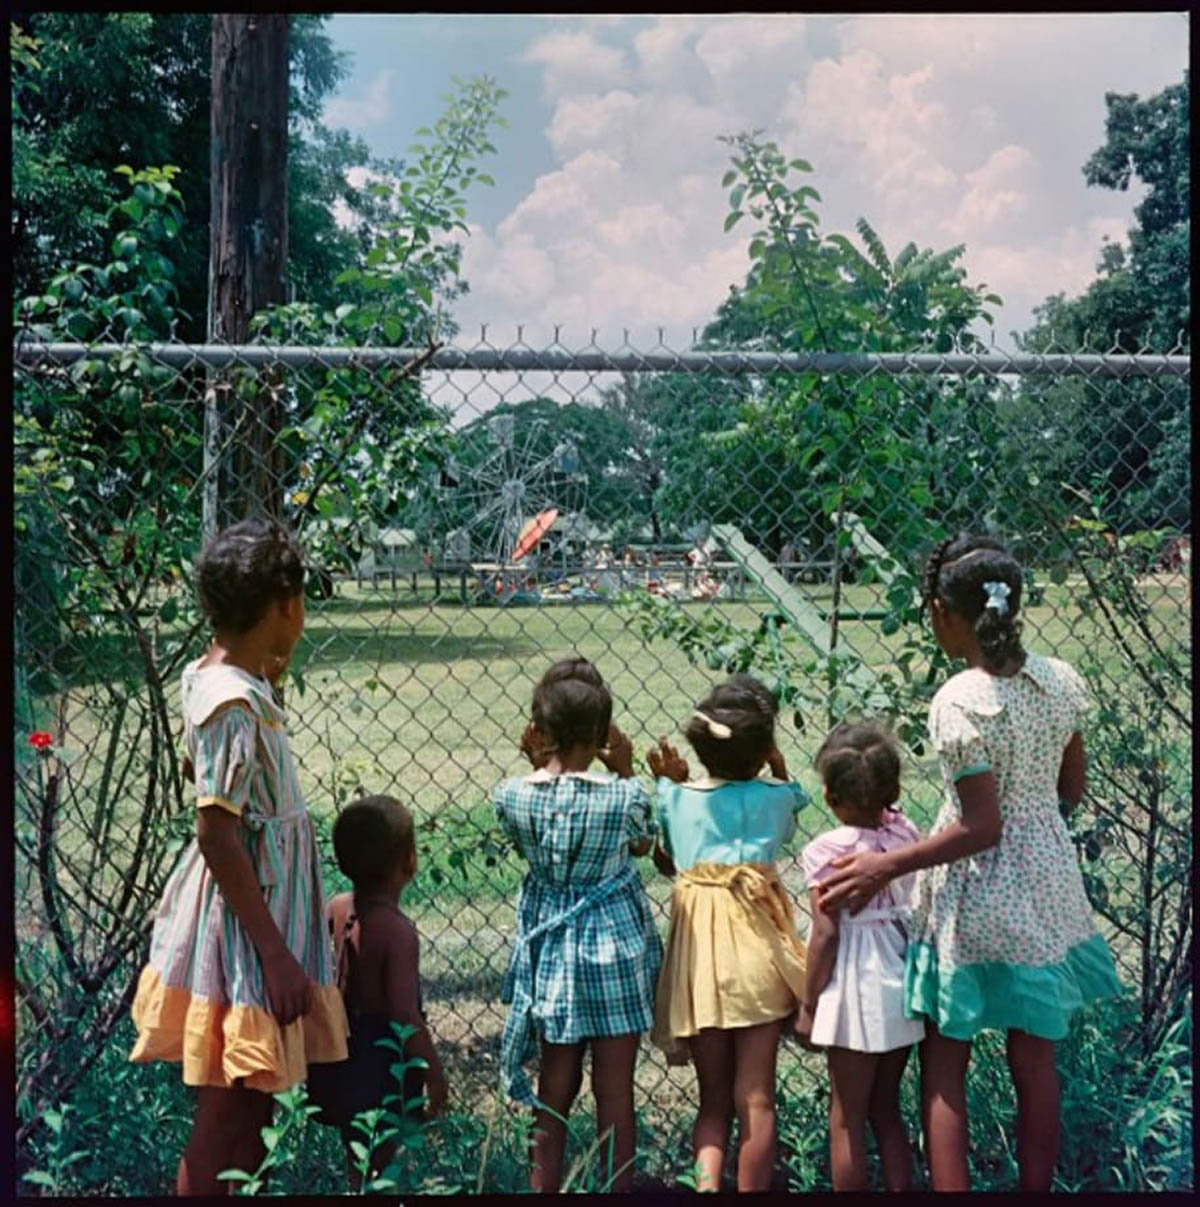 Photograph of six young children peering through a chainlink fence into a park.